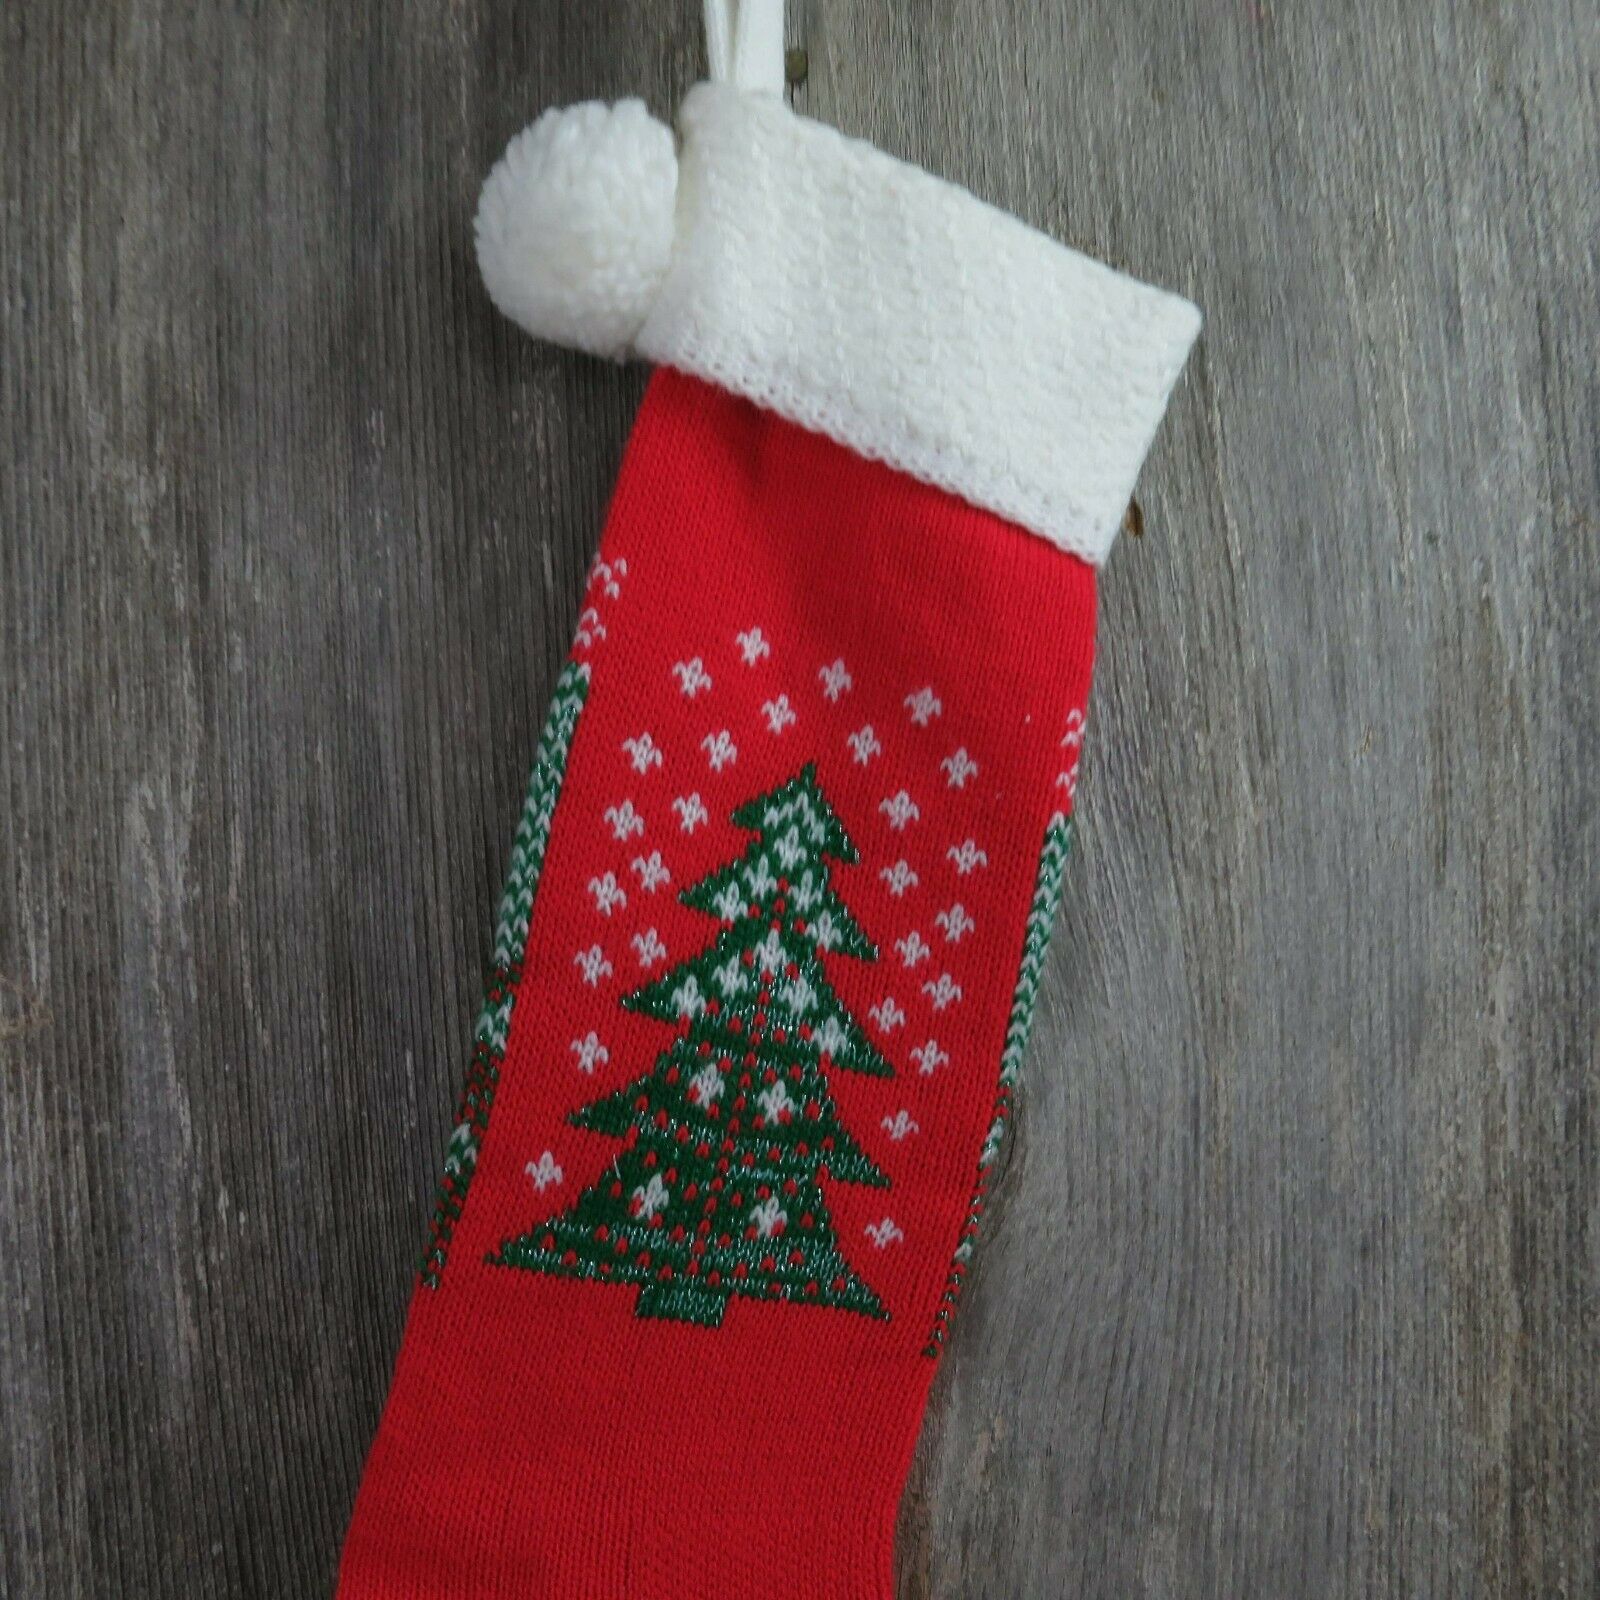 Vintage Christmas Tree Stocking Knitted Knit Green Red White Pom Pom - At Grandma's Table